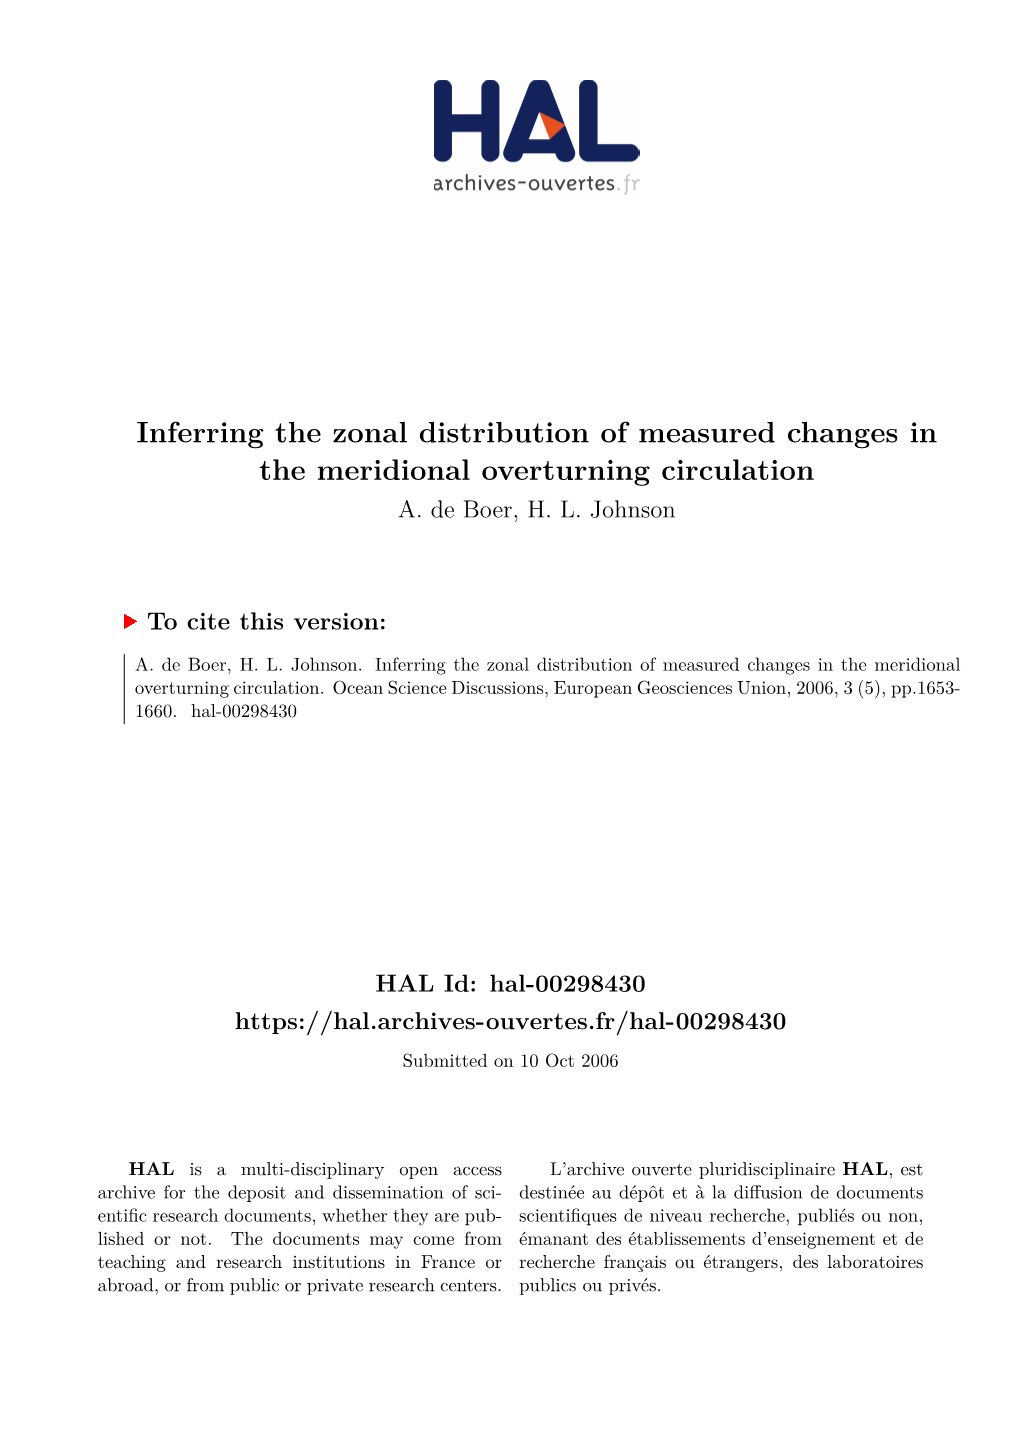 Inferring the Zonal Distribution of Measured Changes in the Meridional Overturning Circulation A